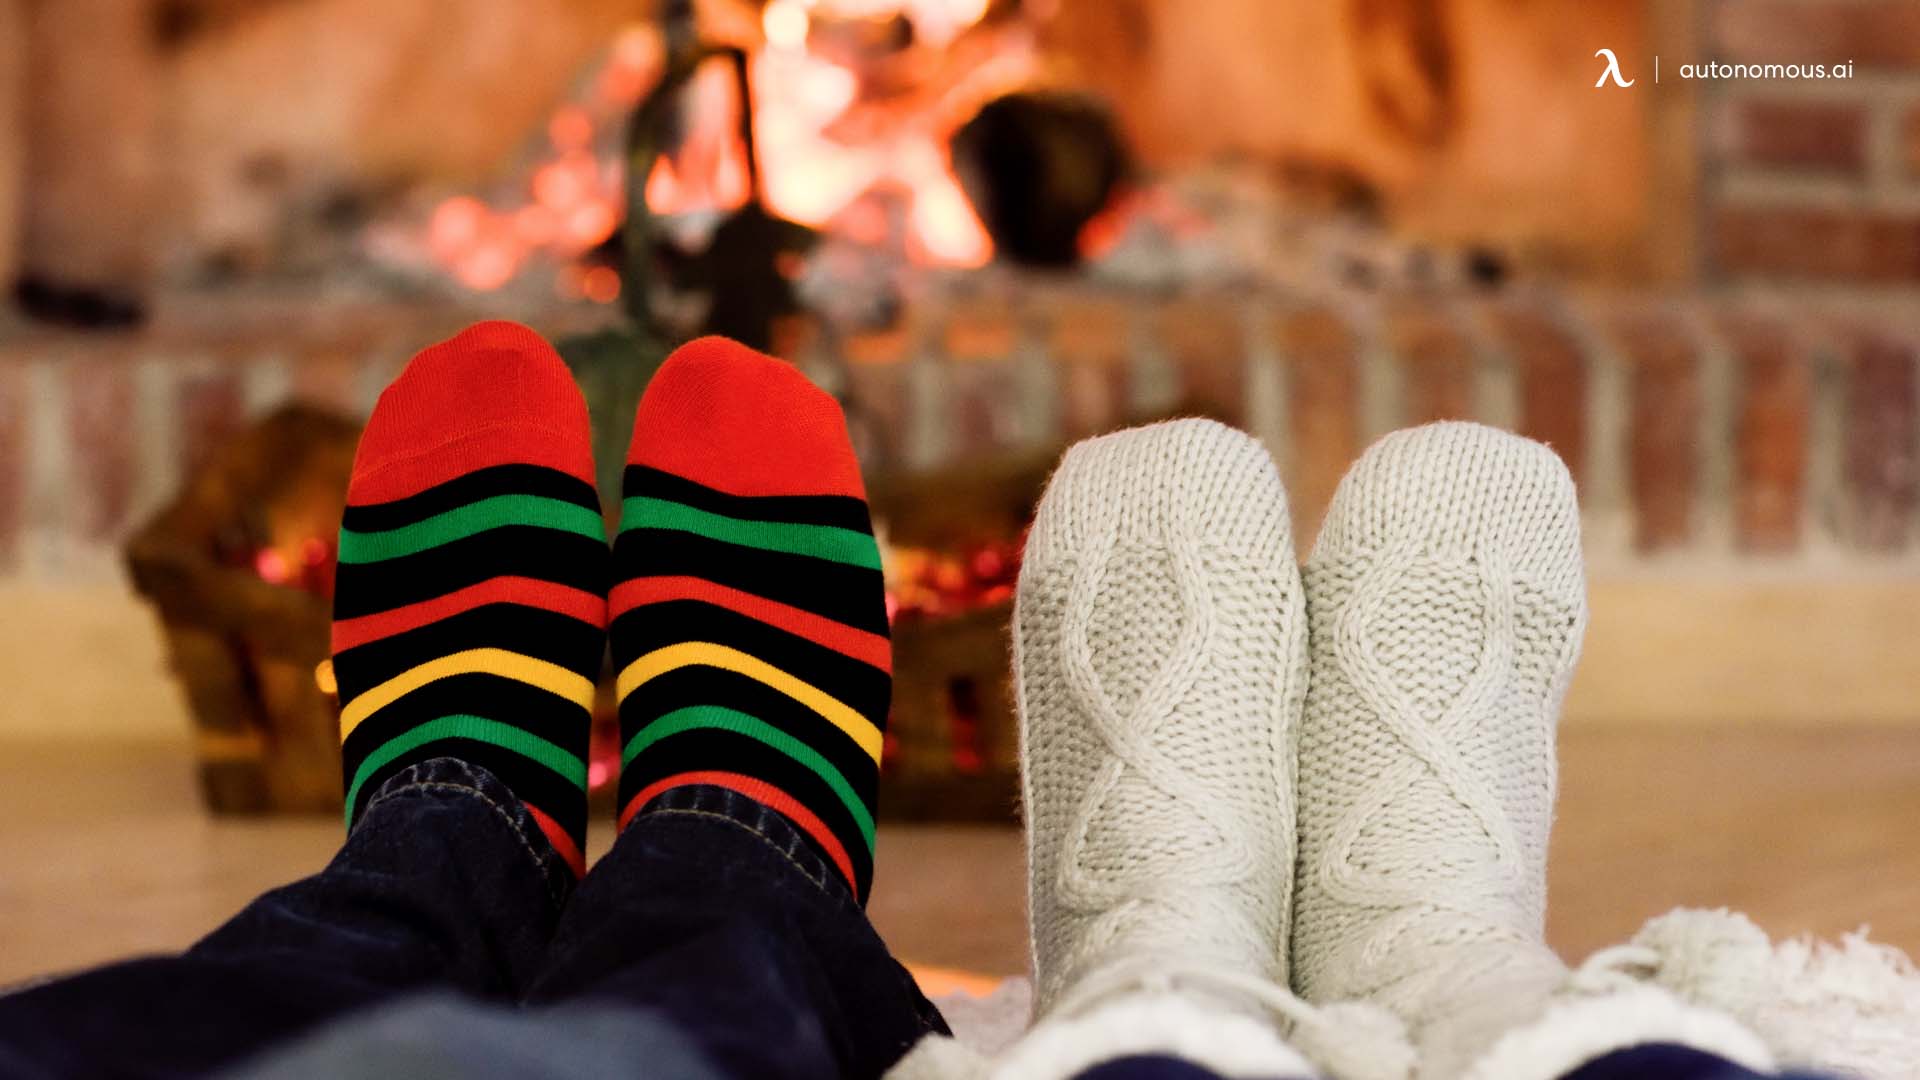 6 Ways to Stay Cozy on Christmas Holiday